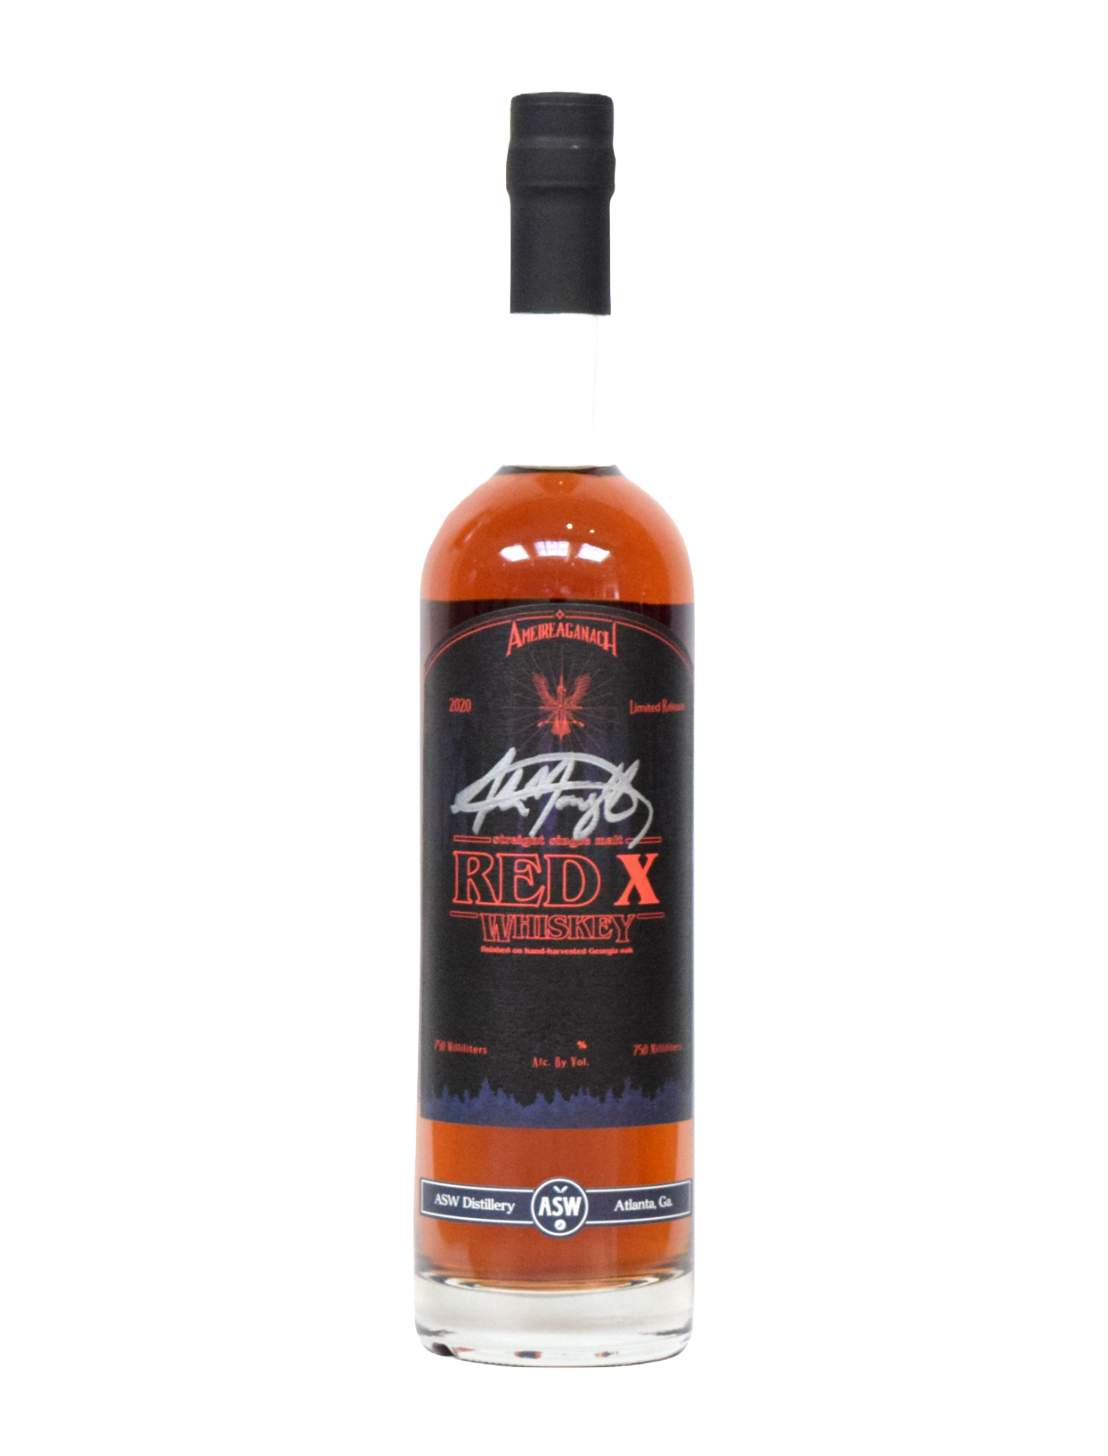 An elegant bottle of ASW Distillery Red X Single Malt Whiskey in front of a plain white background